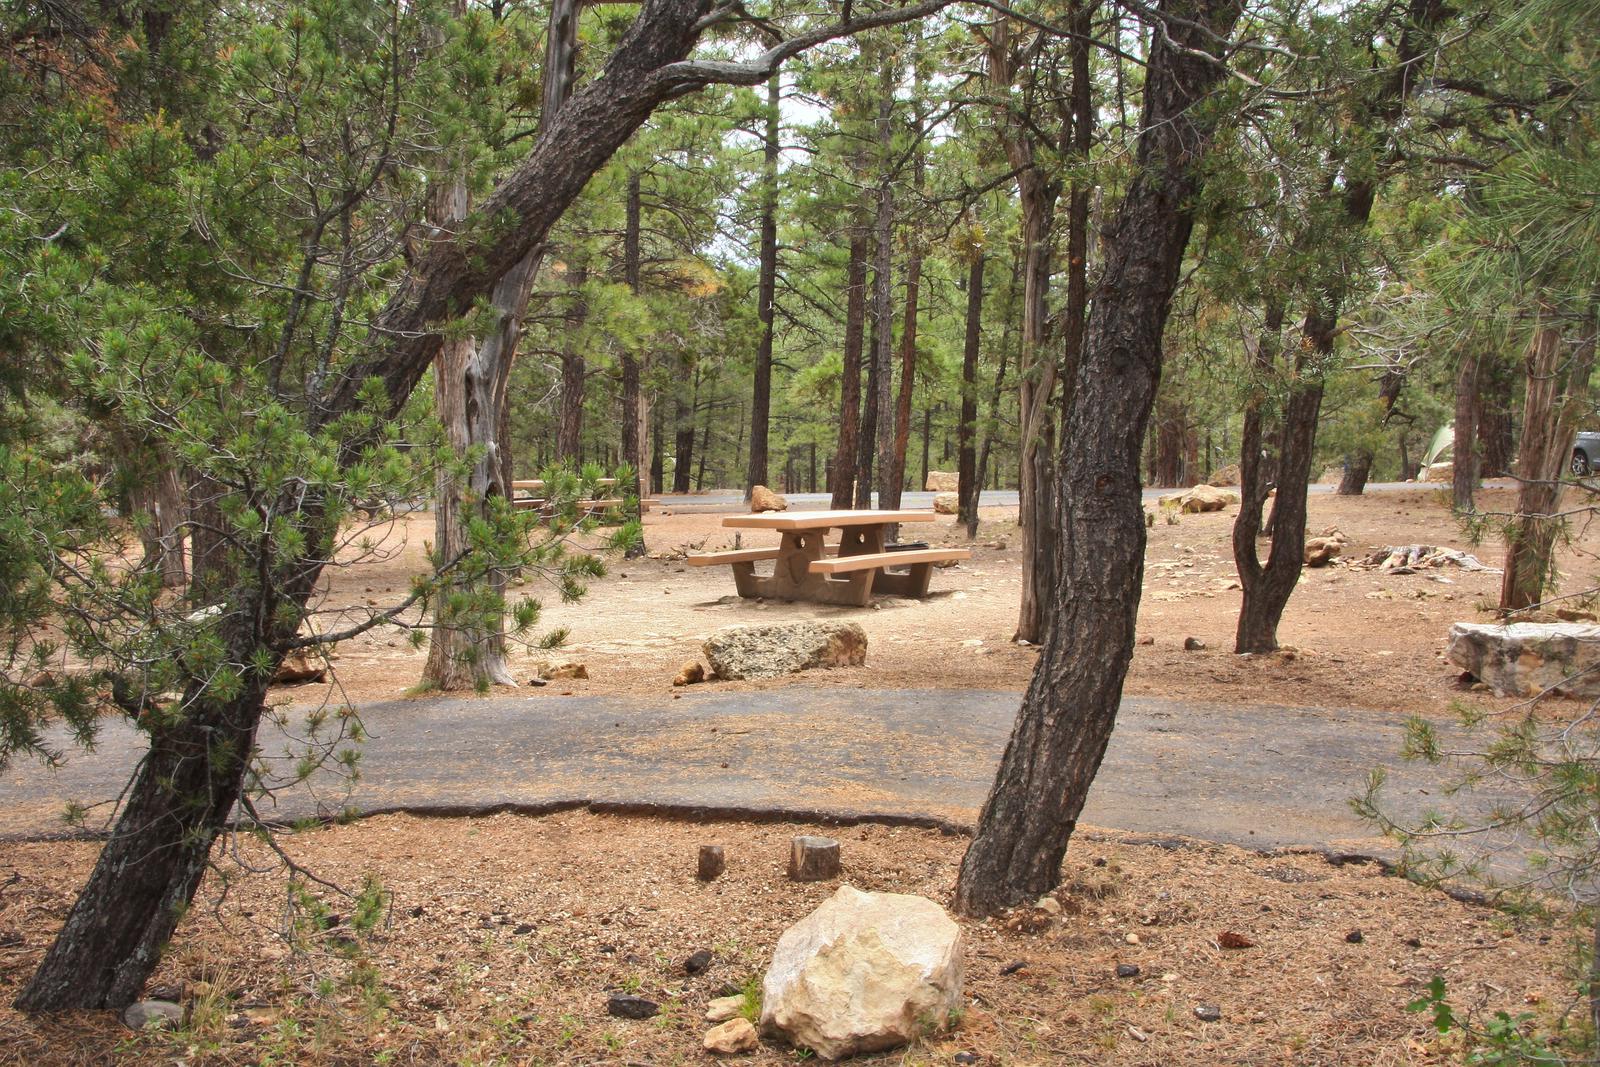 Picnic tableand parking spot, Mather CampgroundThe picnic table and parking spot for Aspen Loop 28, Mather Campground